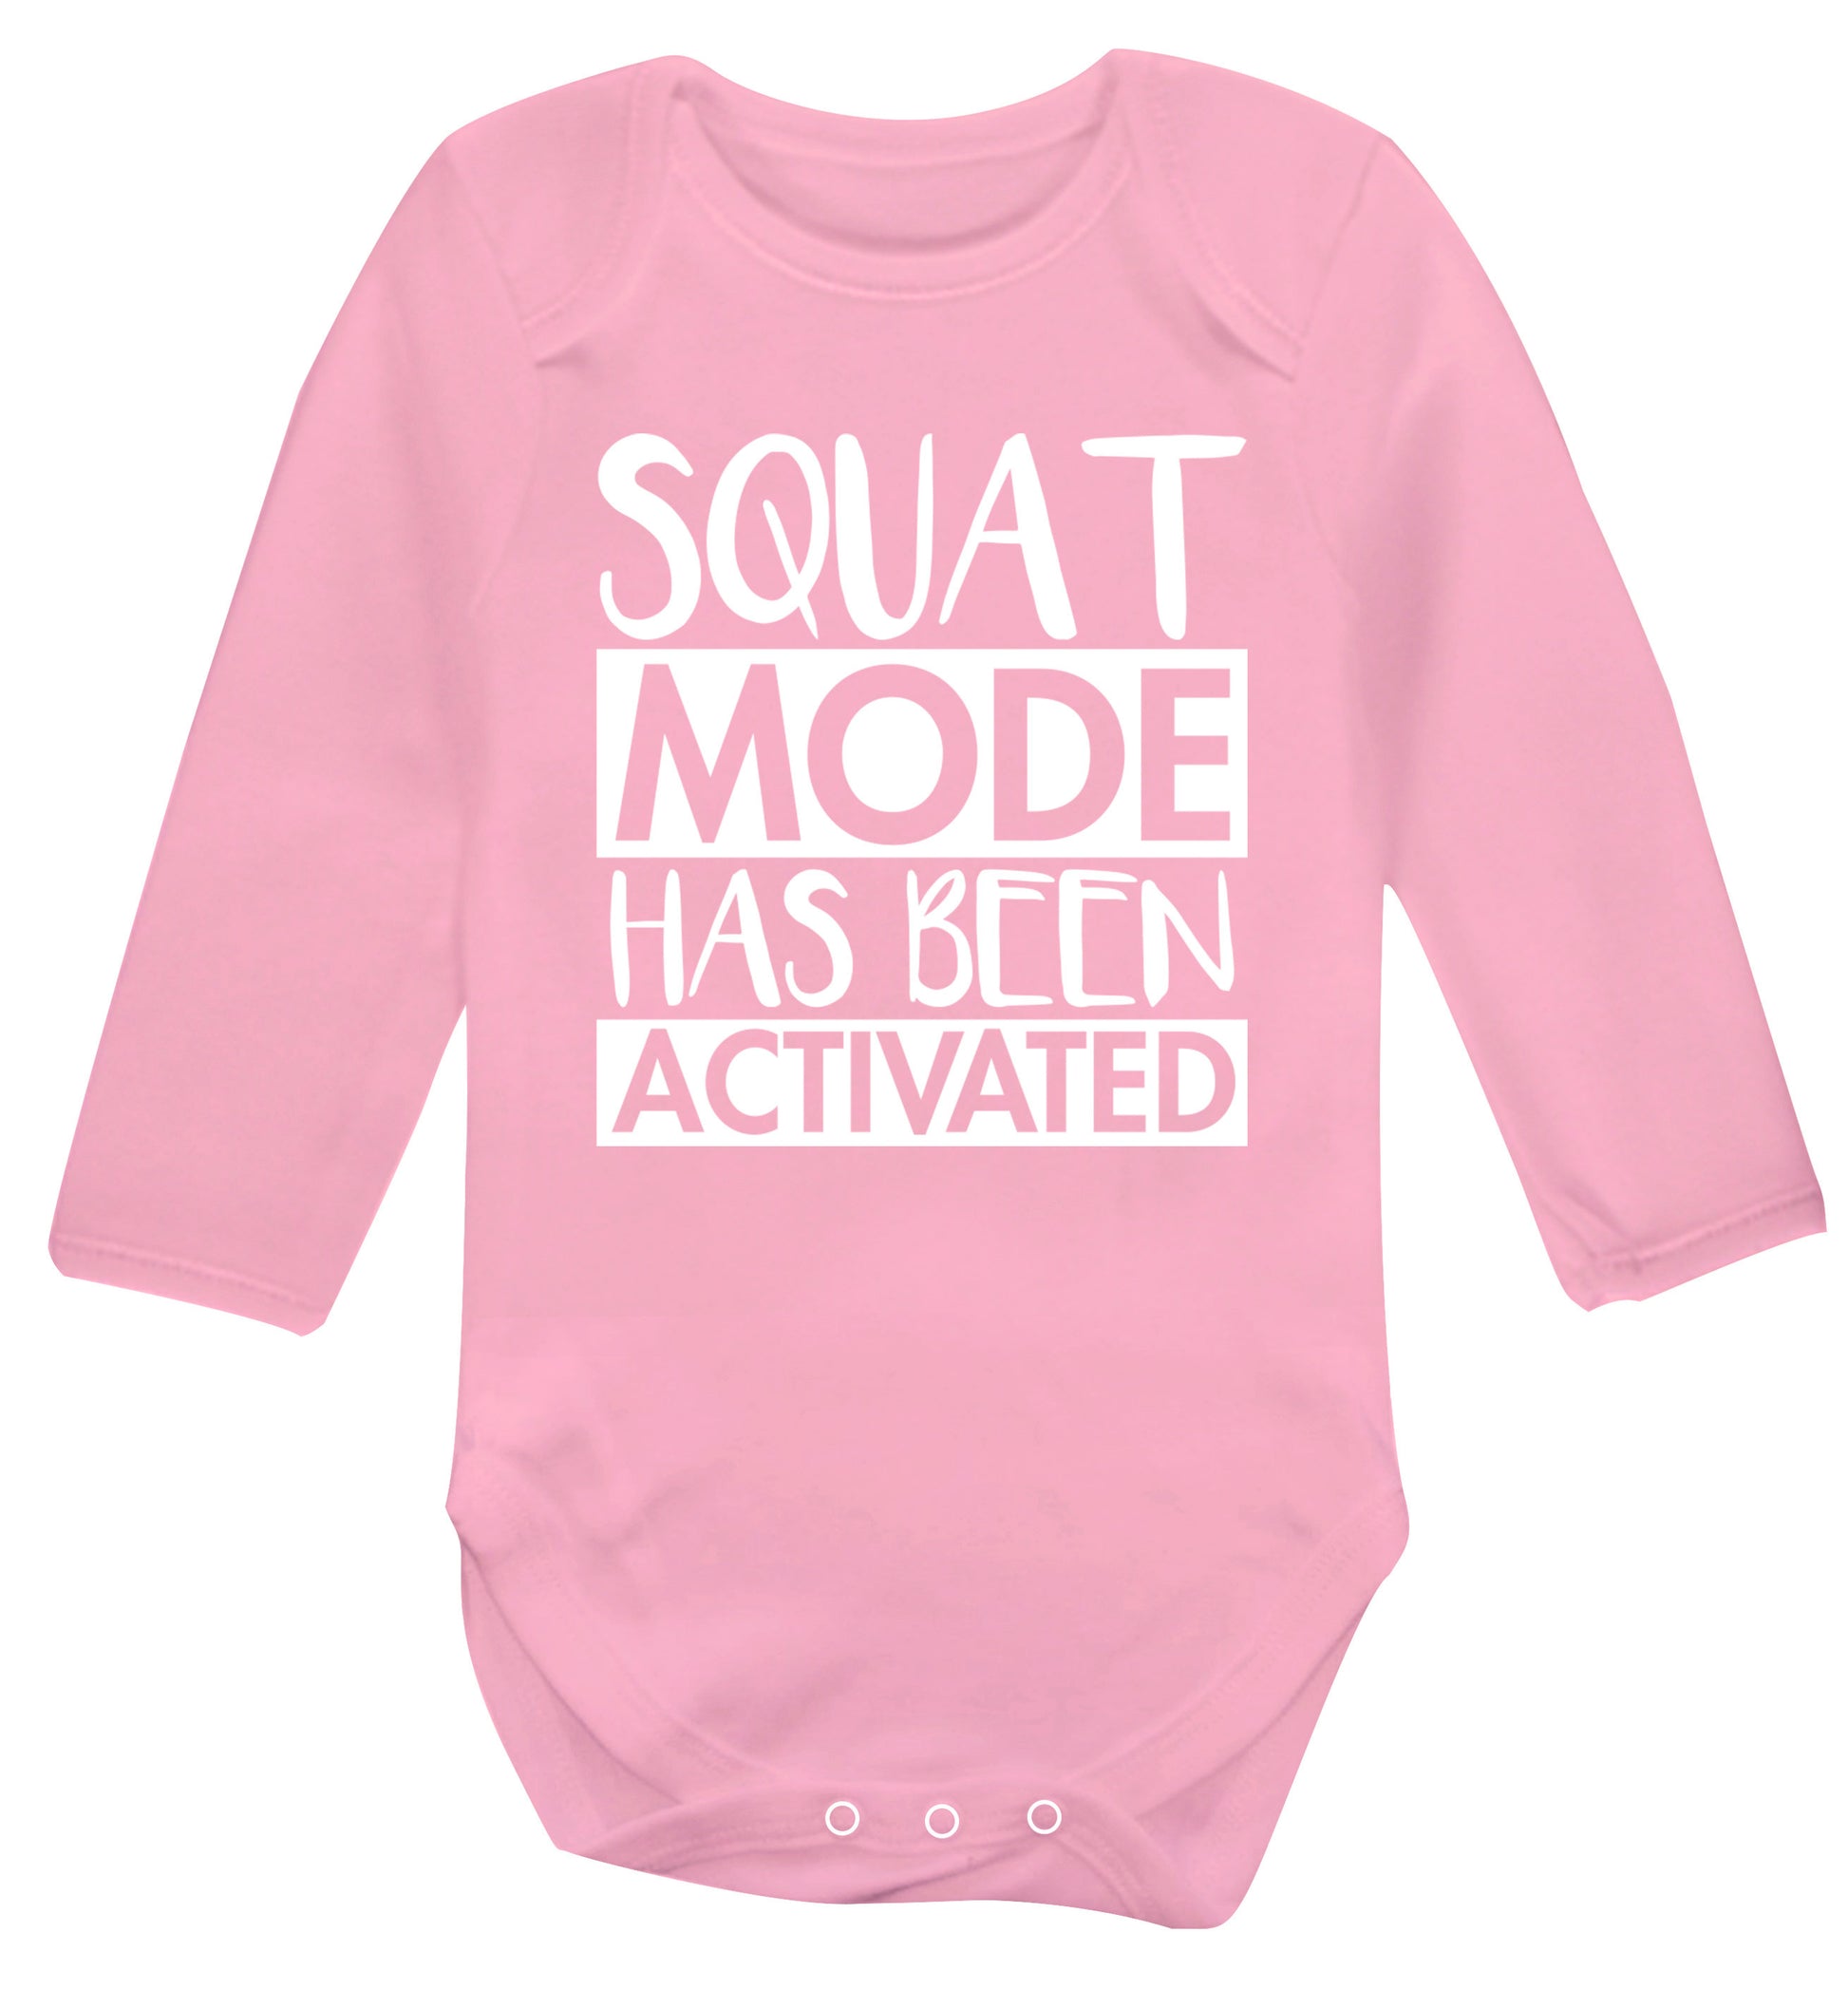 Squat mode activated Baby Vest long sleeved pale pink 6-12 months